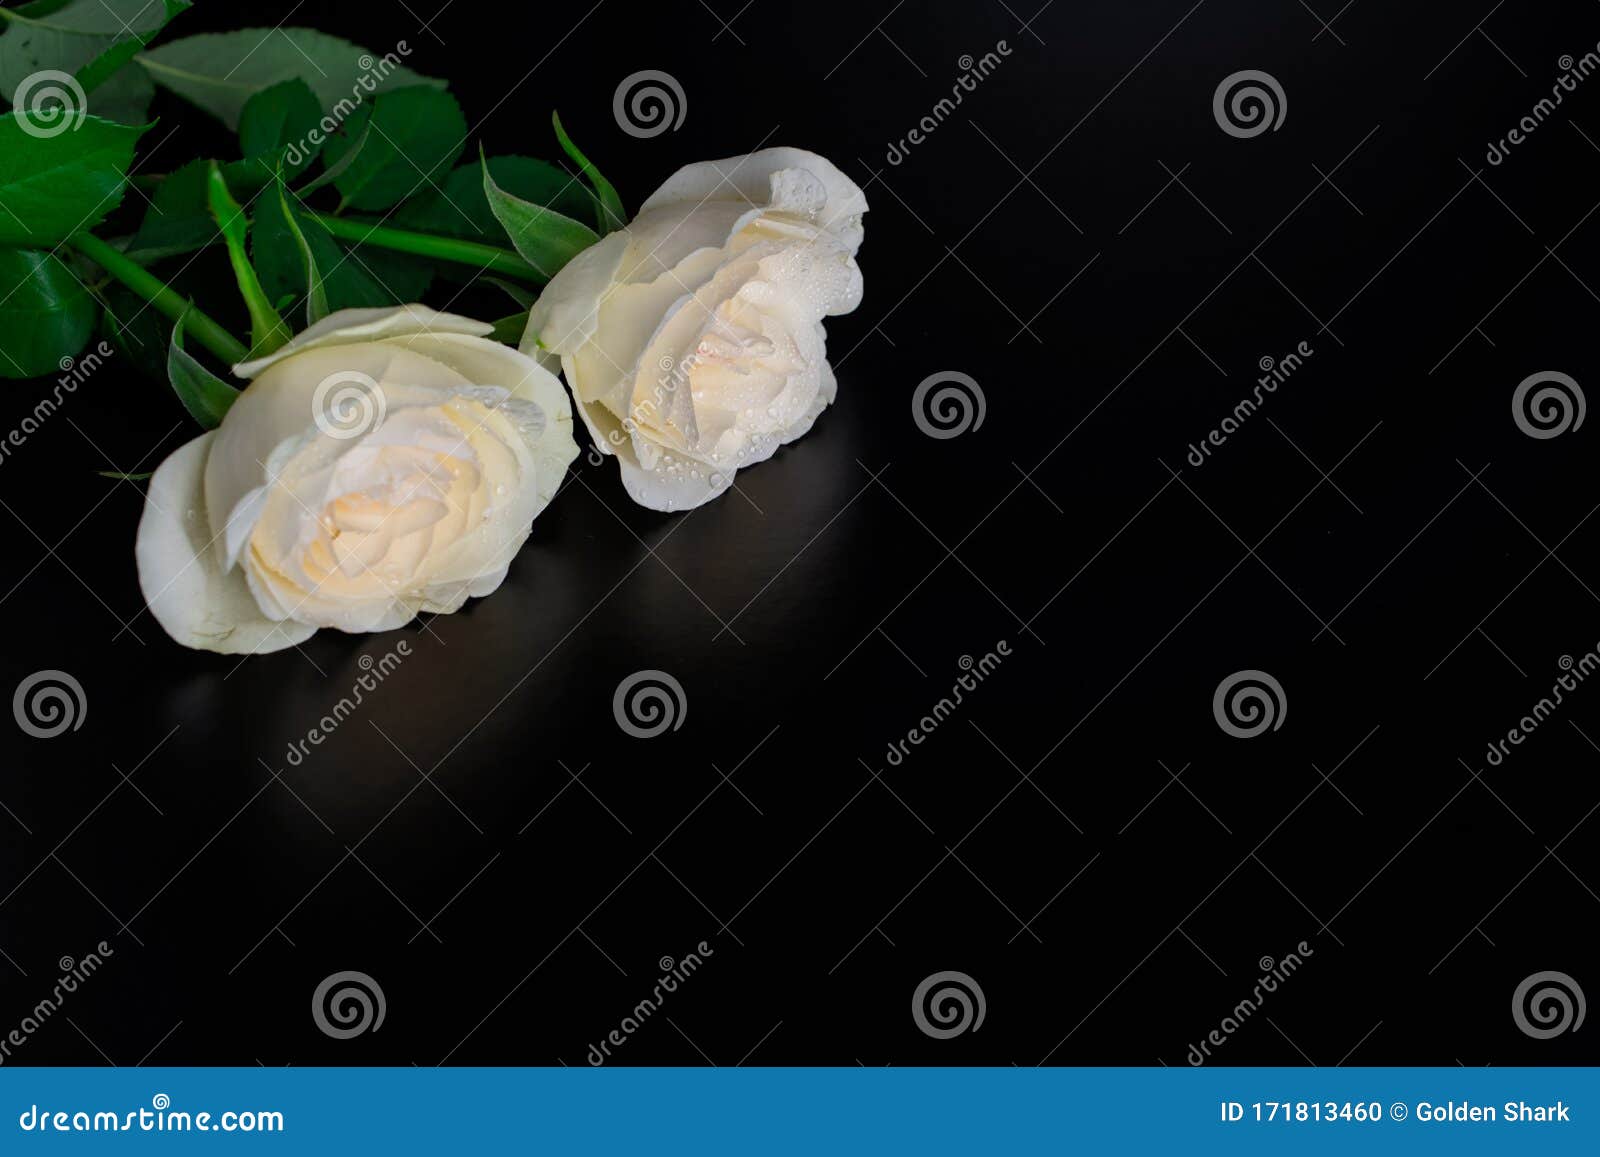 Beautiful Flowers on Black Background with Two Cream Roses Bouquet ...